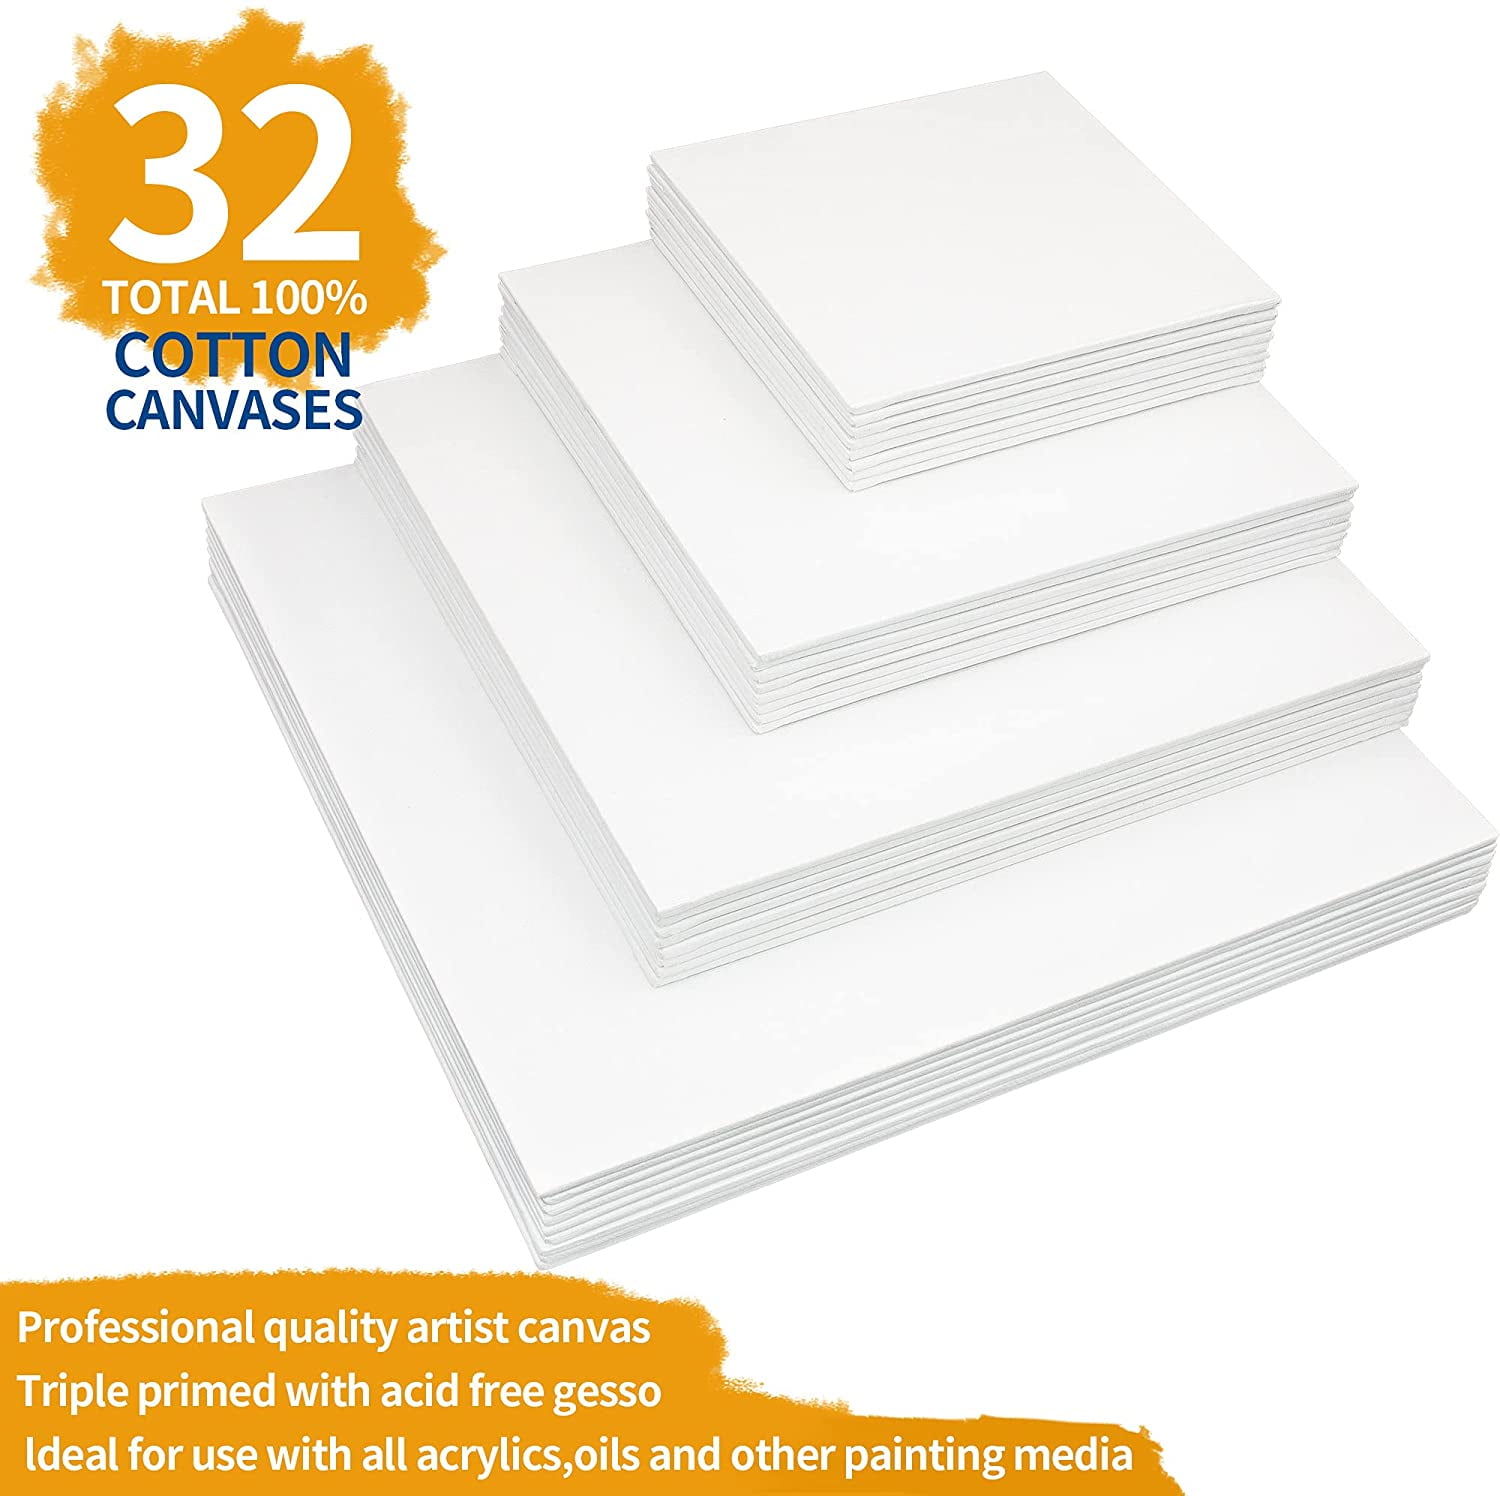 FIXSMITH Painting Canvas Panels - 6 x6 Inch Canvas Panel Super Value 12  Pack Canvases,100% Cotton,Square Canvas Board,Mini Canvas,Artist Canvas  Boards